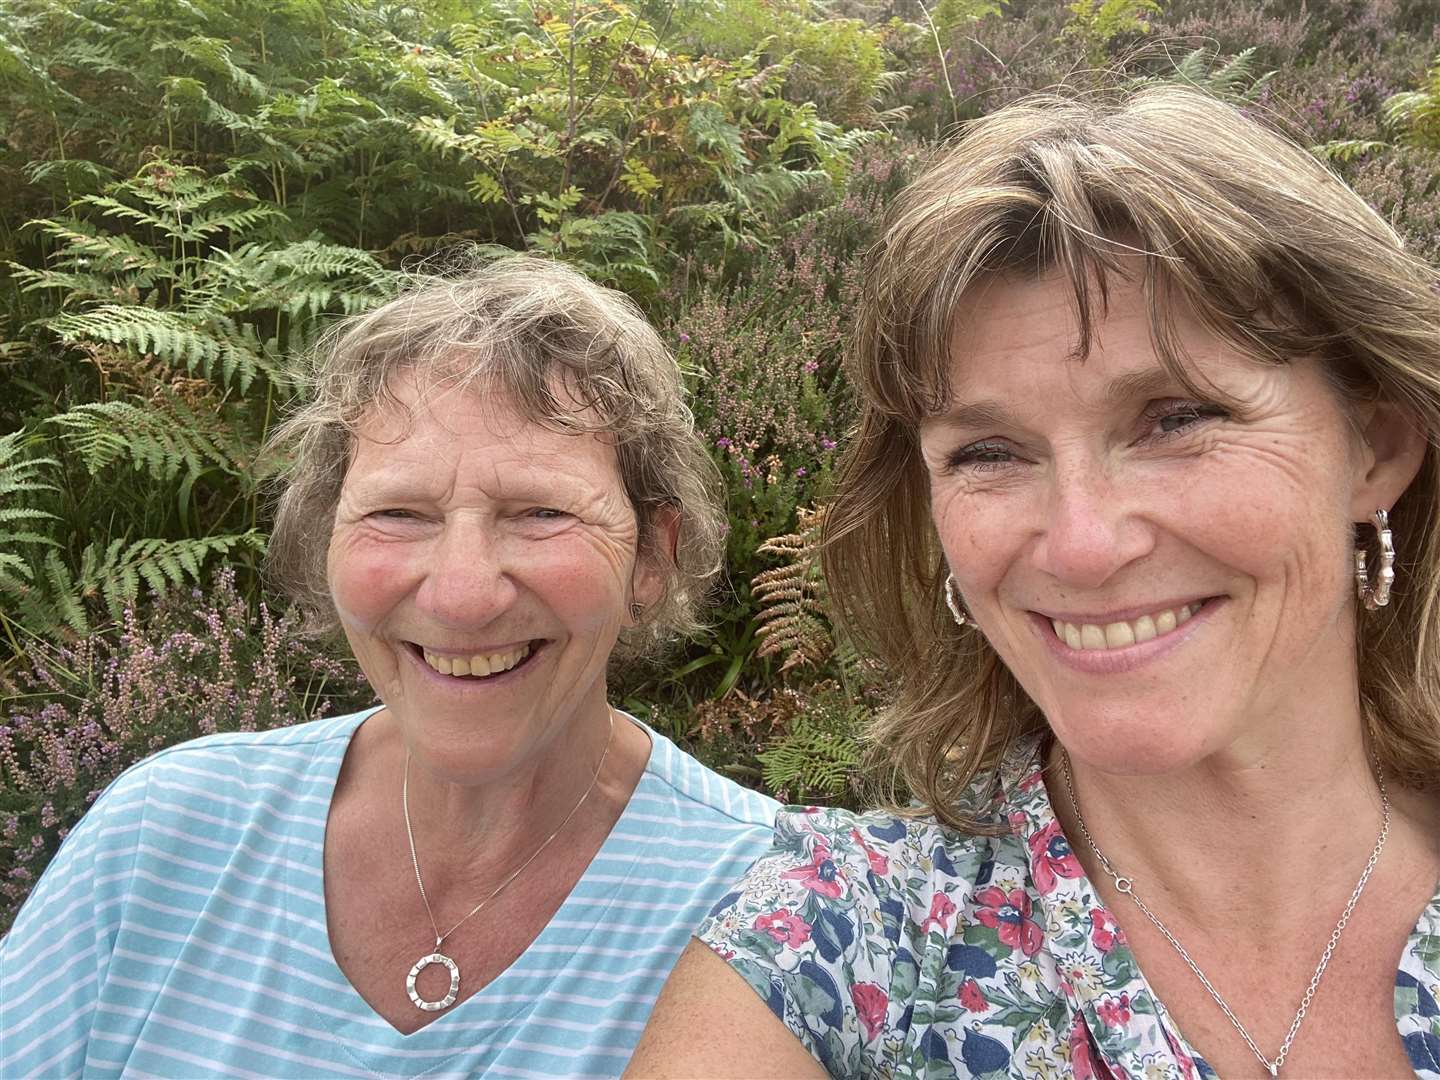 Nicky Marr and her mum share a smile - and the crinkles around their eyes that go with it.